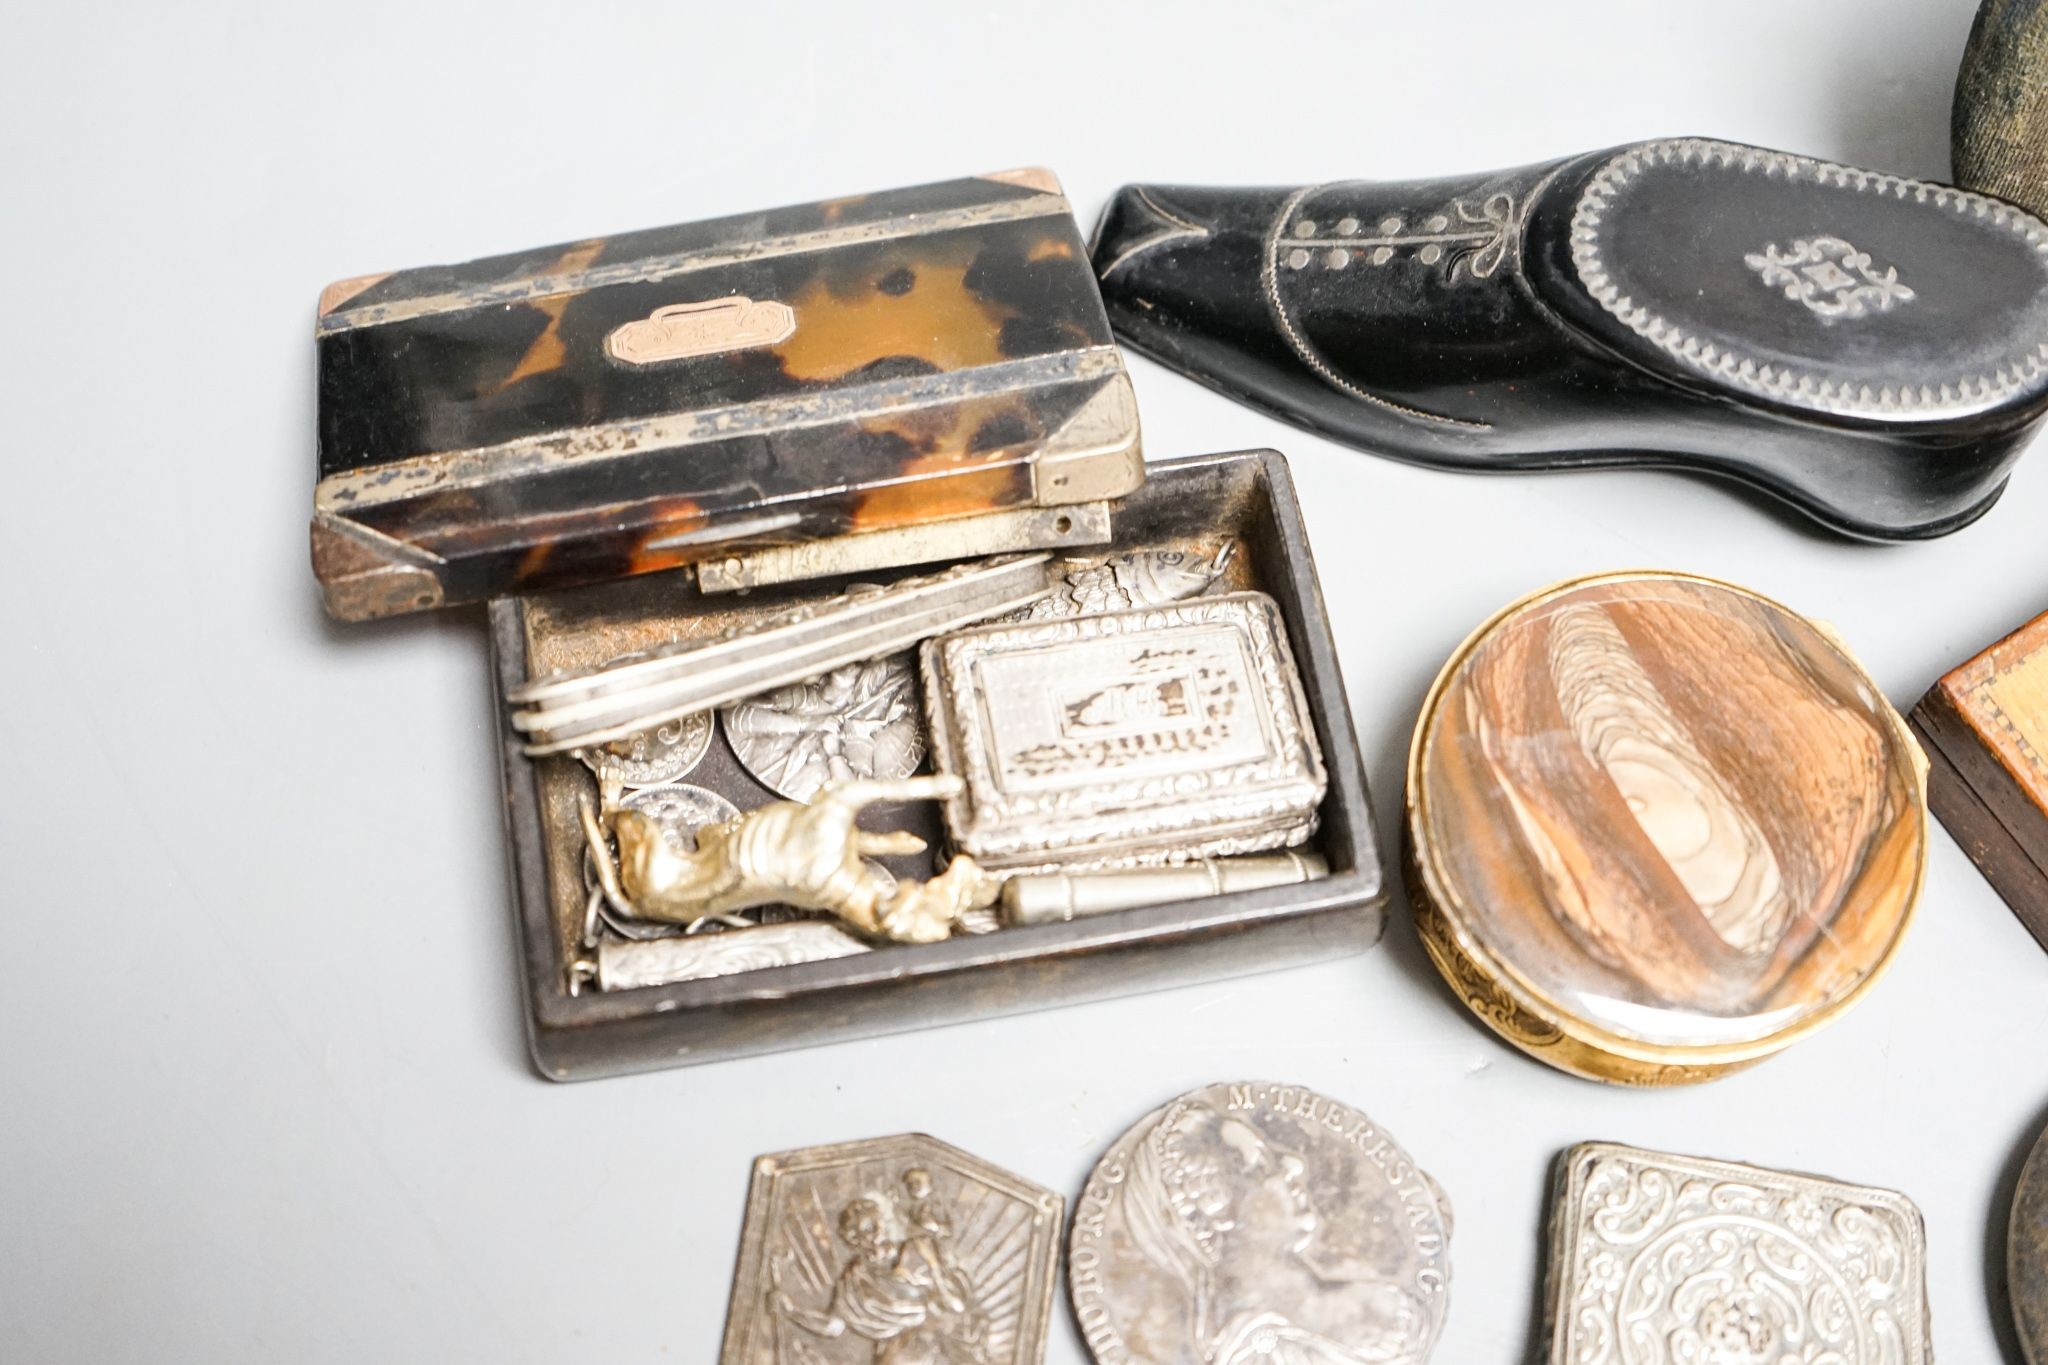 A collection of cabinet curios, including - An early 19th century miniature carved ivory bust of a gentleman, a gilt metal and agate snuff box, a George IV silver vinaigrette, by Taylor and Perry, a silver compact, a Reg